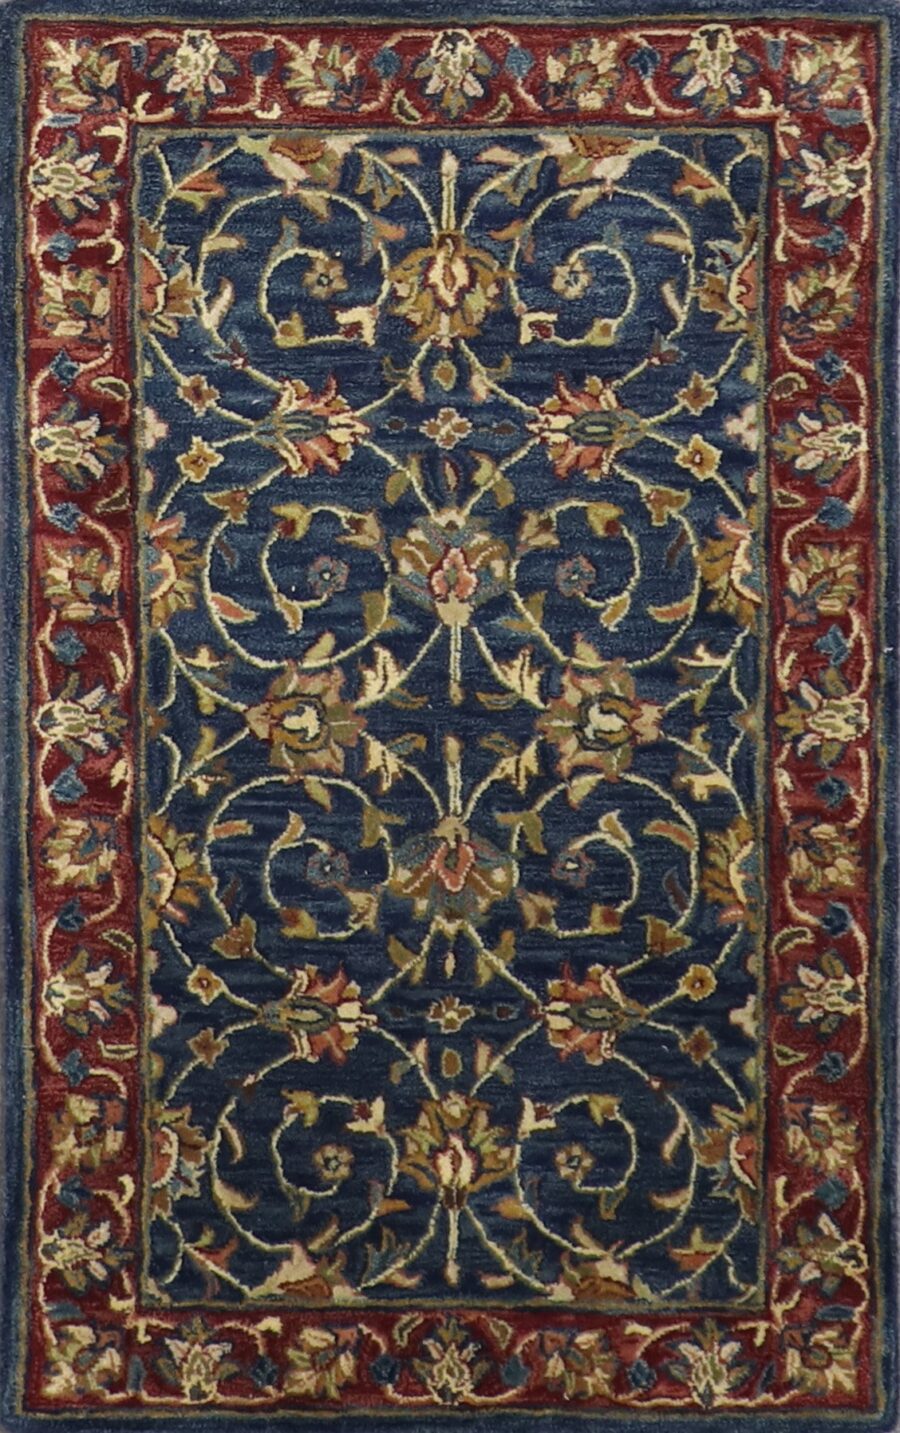 3’1”x5’1’ Decorative Navy Wool Hand-Tufted Rug - Direct Rug Import | Rugs in Chicago, Indiana,South Bend,Granger